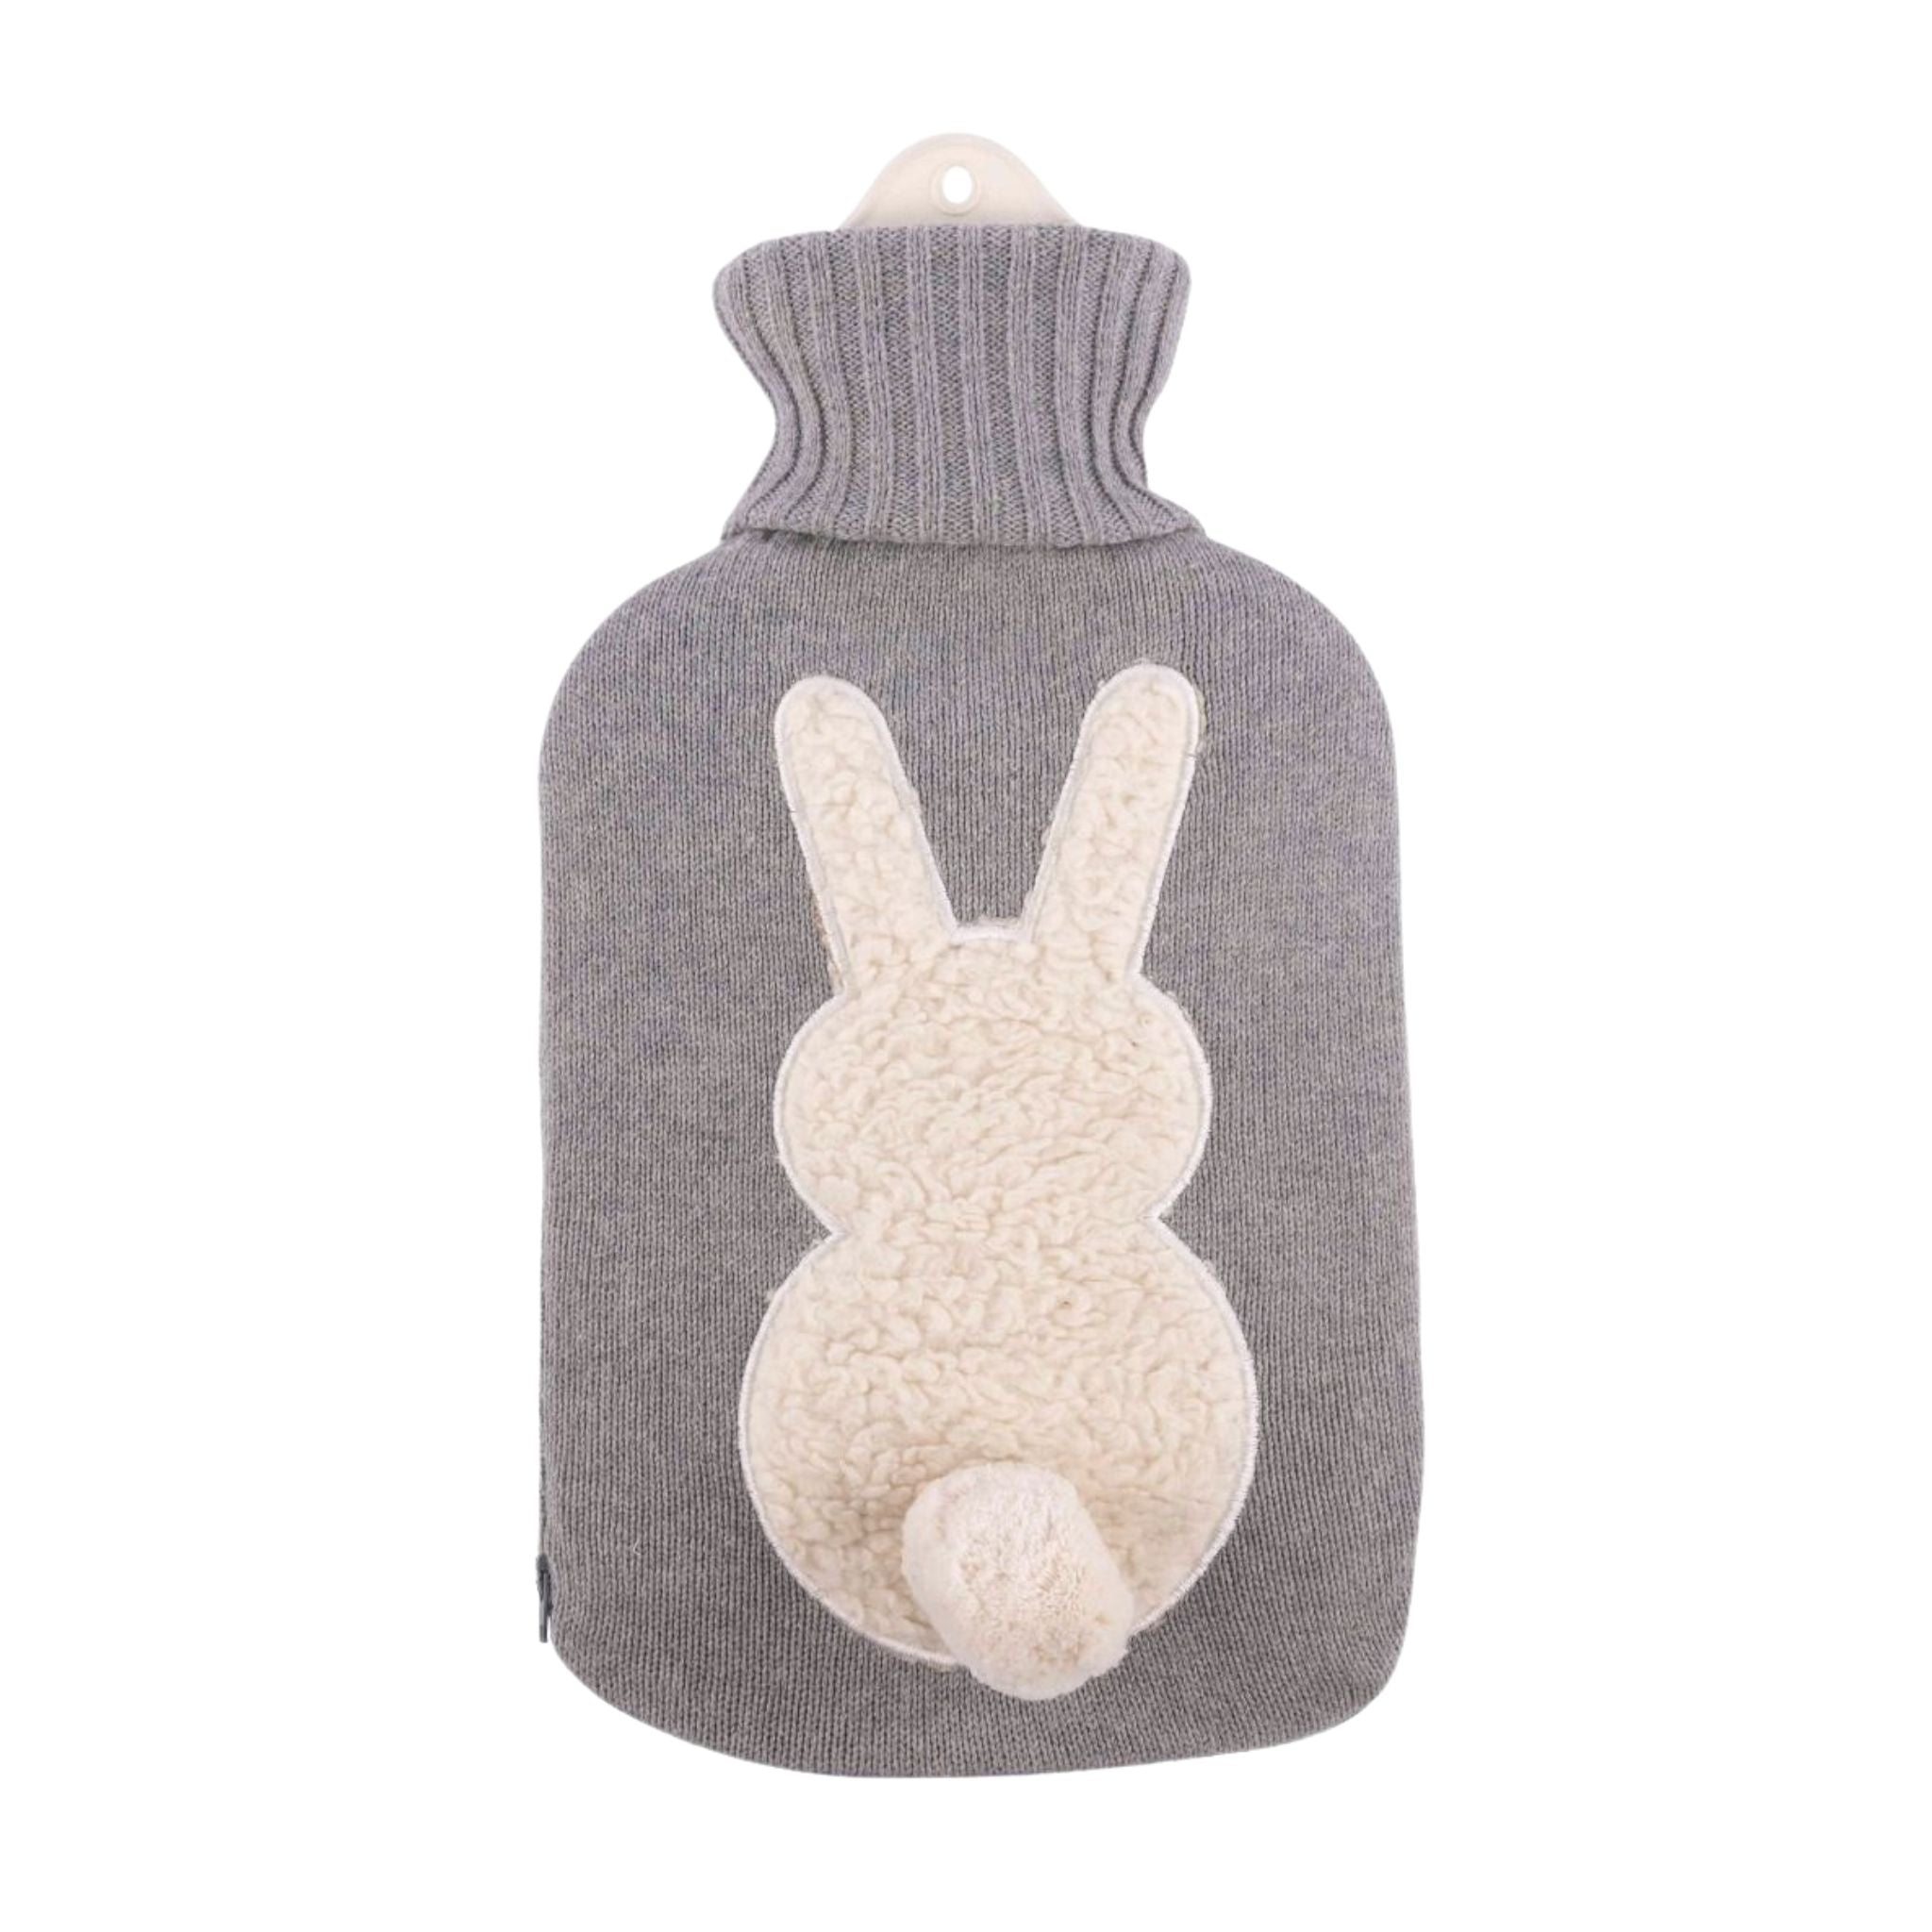 2 Litre Sanger Hot Water Bottle with Knitted 3D Bunny Cotton Cover